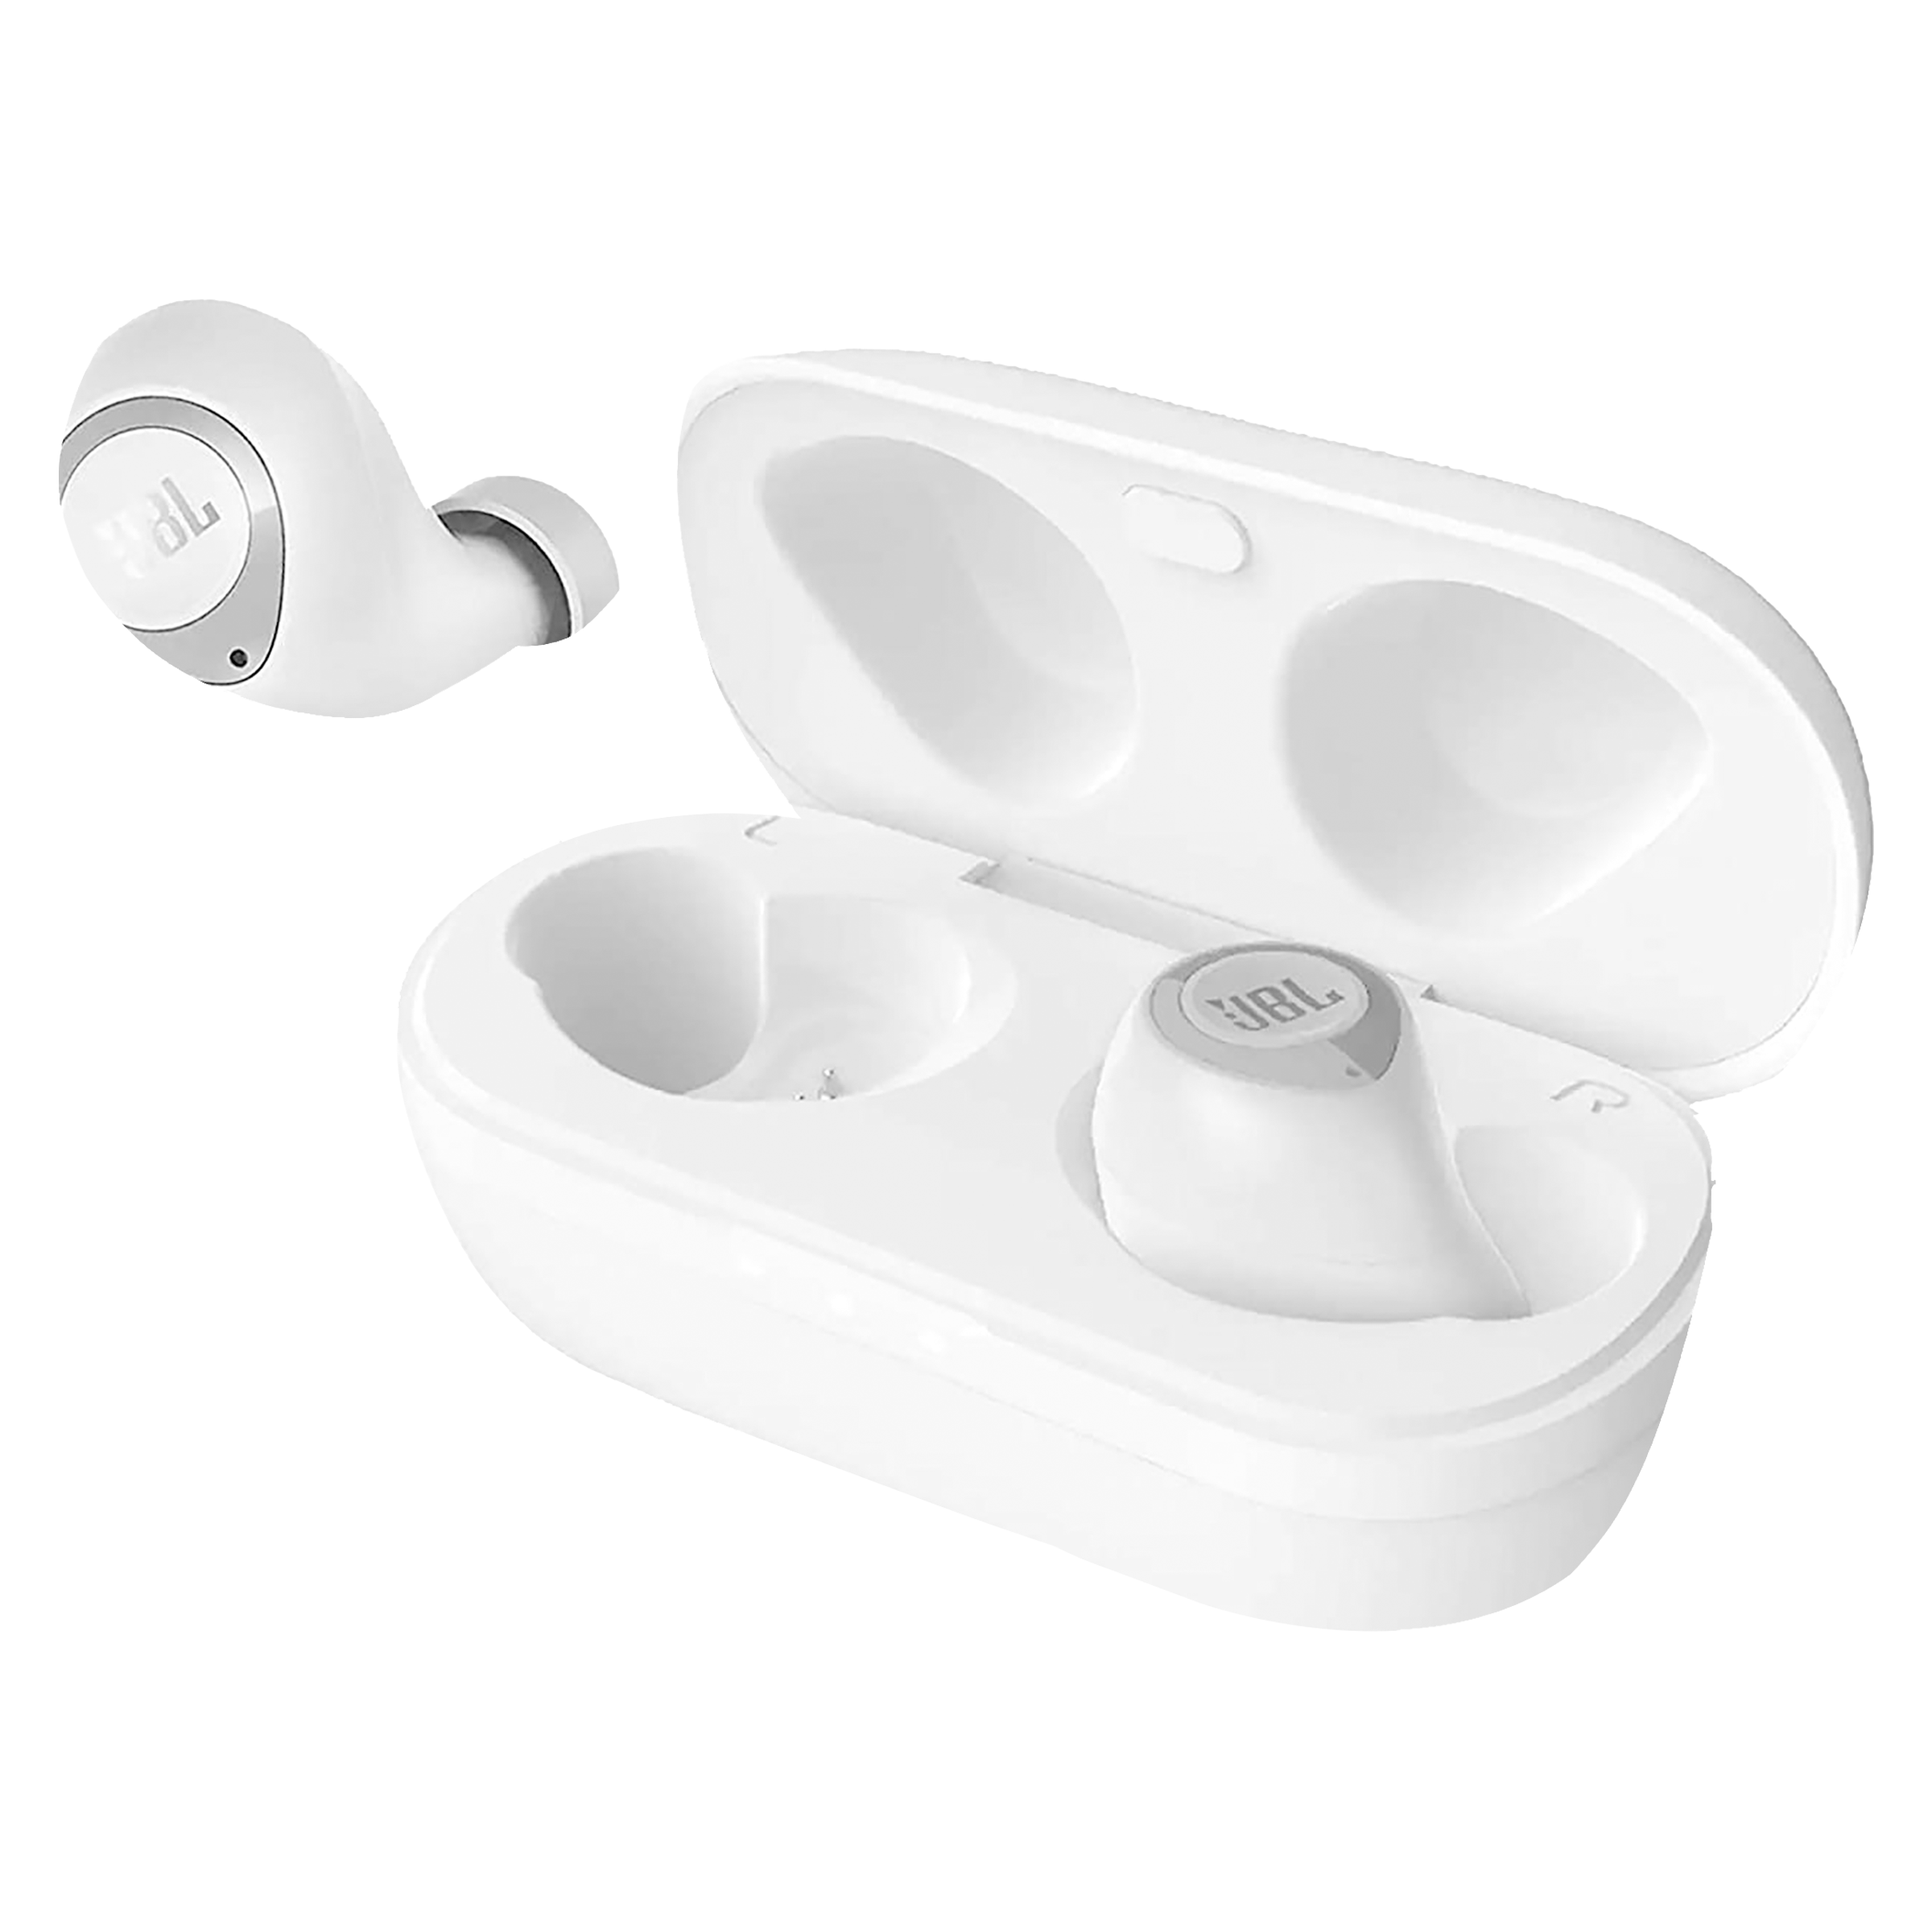 JBL C105TWS JBLC105TWSWHT In-Ear Truly Wireless Earbuds with Mic (Bluetooth 5.0, JBL Pure Bass Sound, White)_1